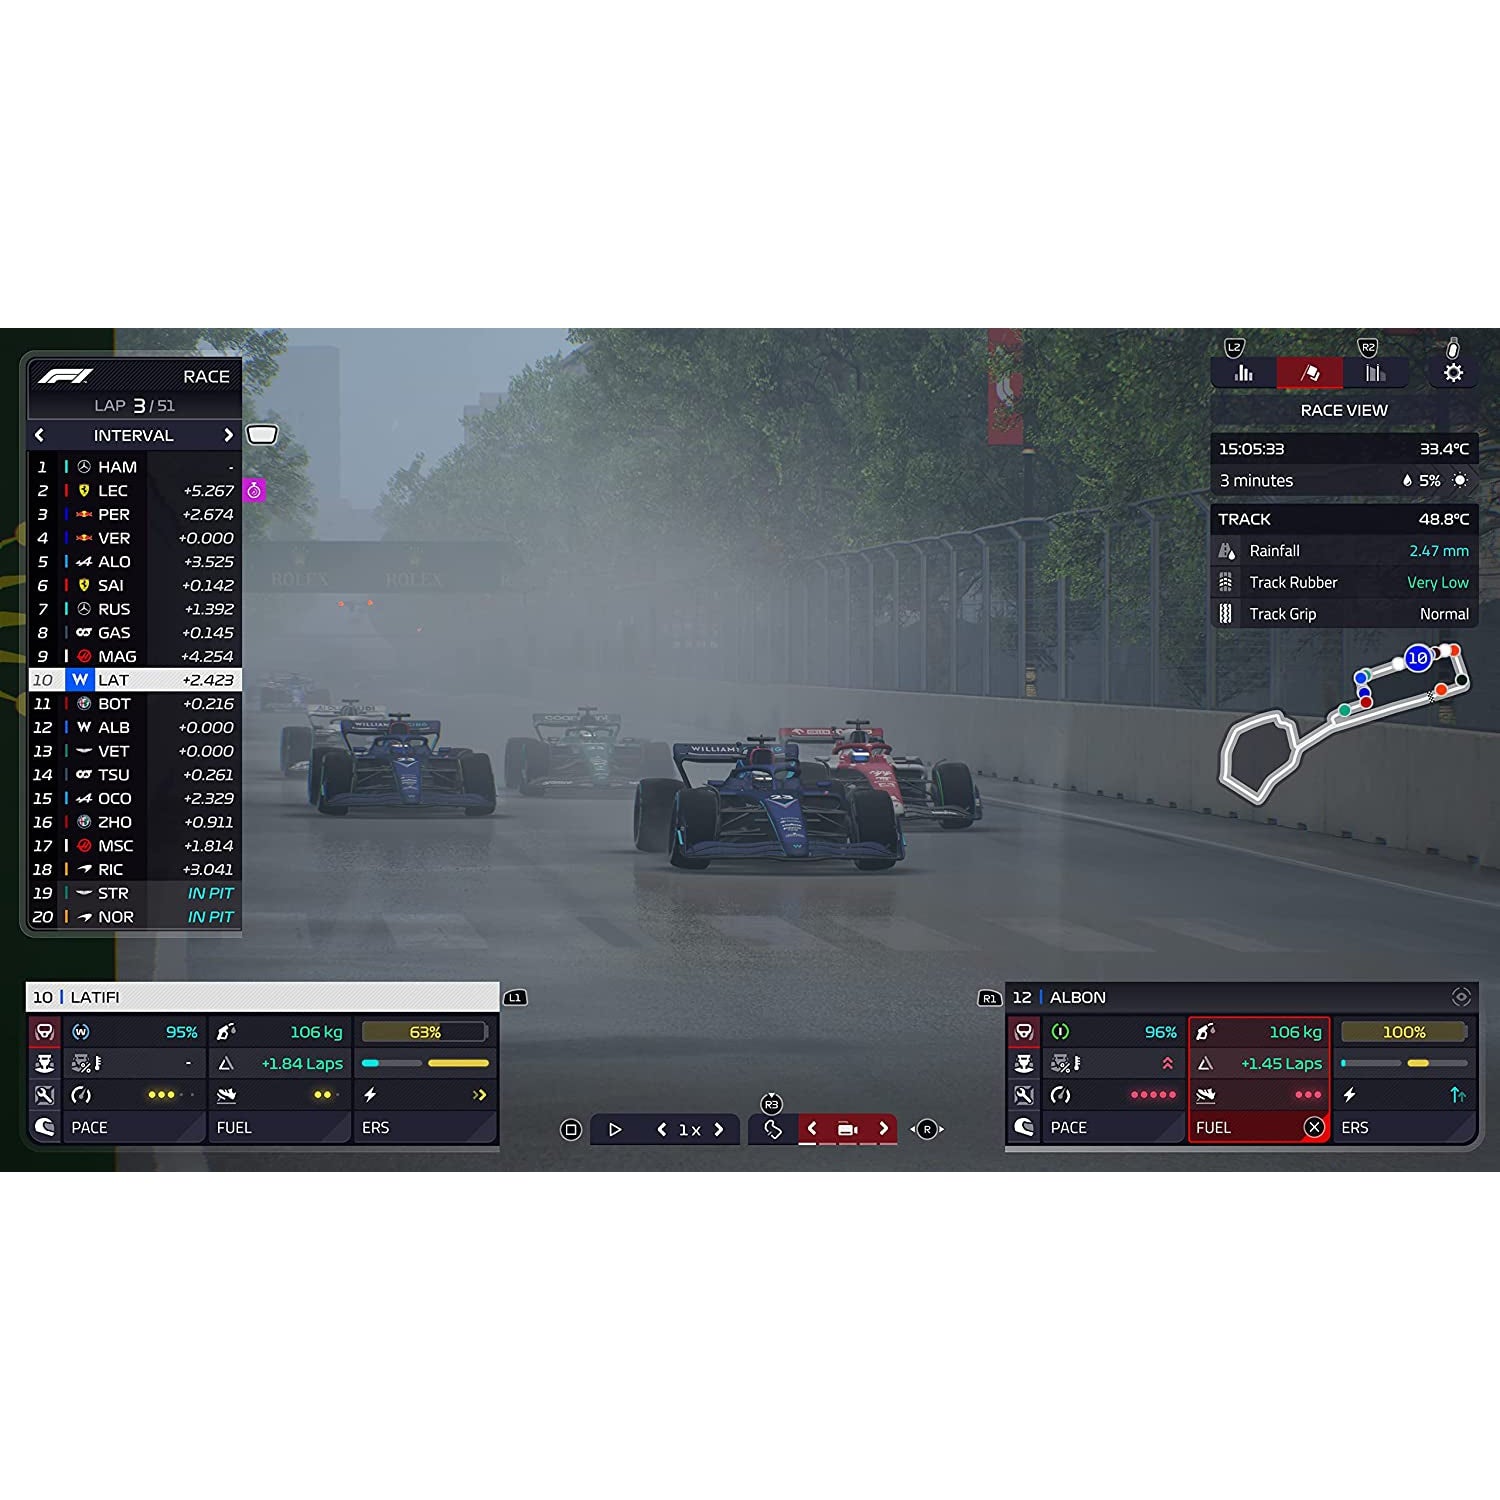 F1 Manager 22 (PS4) - Pristine Condition